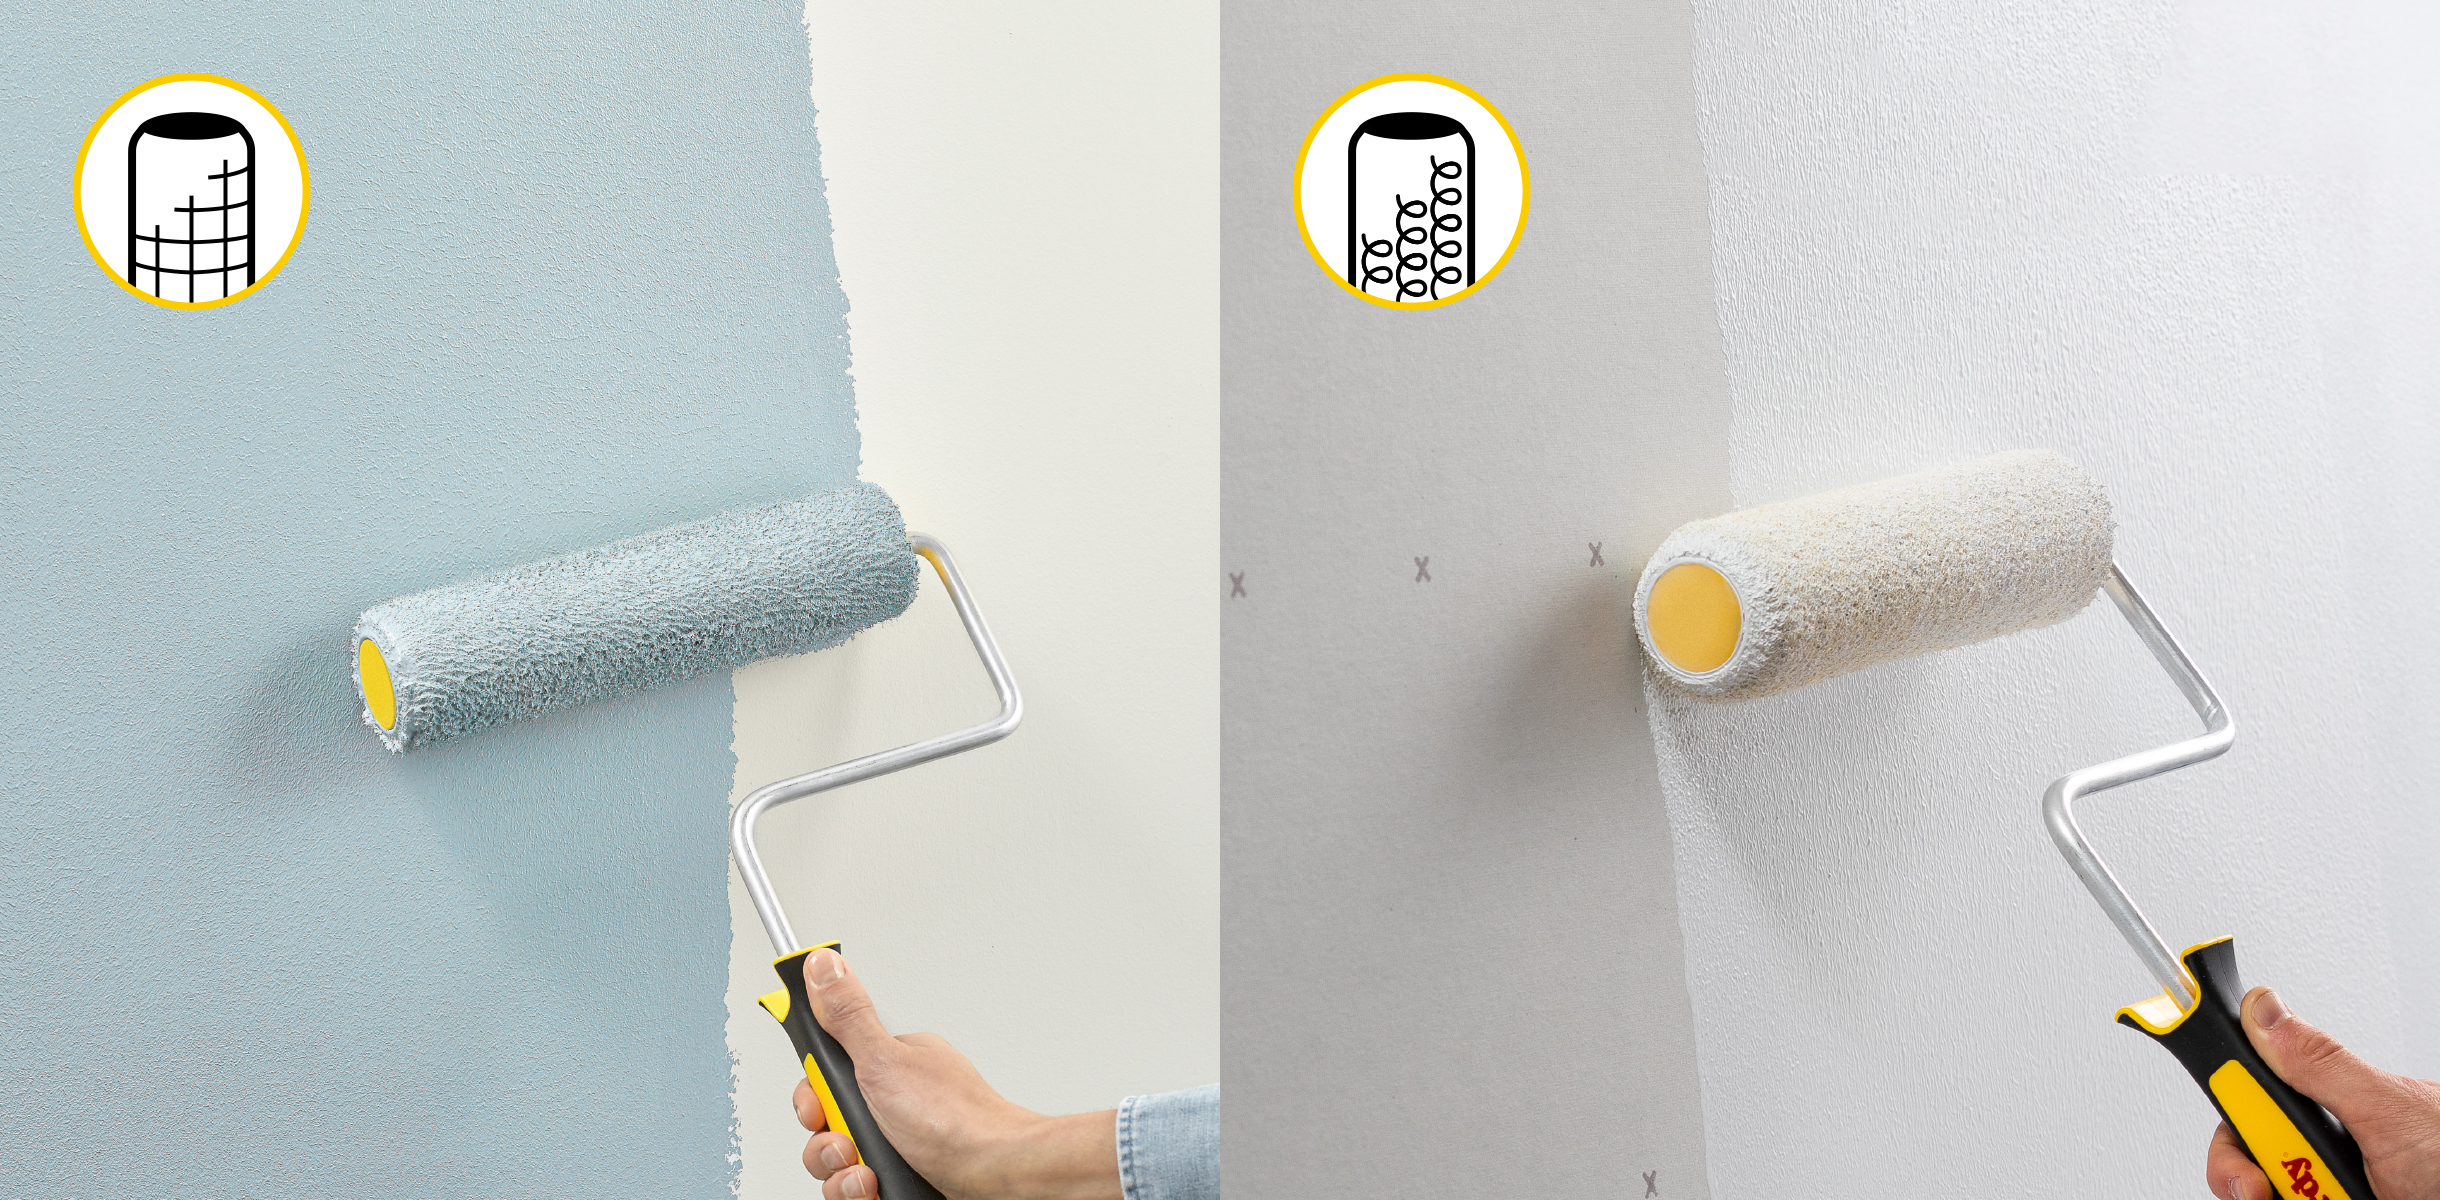 8 Best Roller Brushes for Textured Walls + Tips for Painting